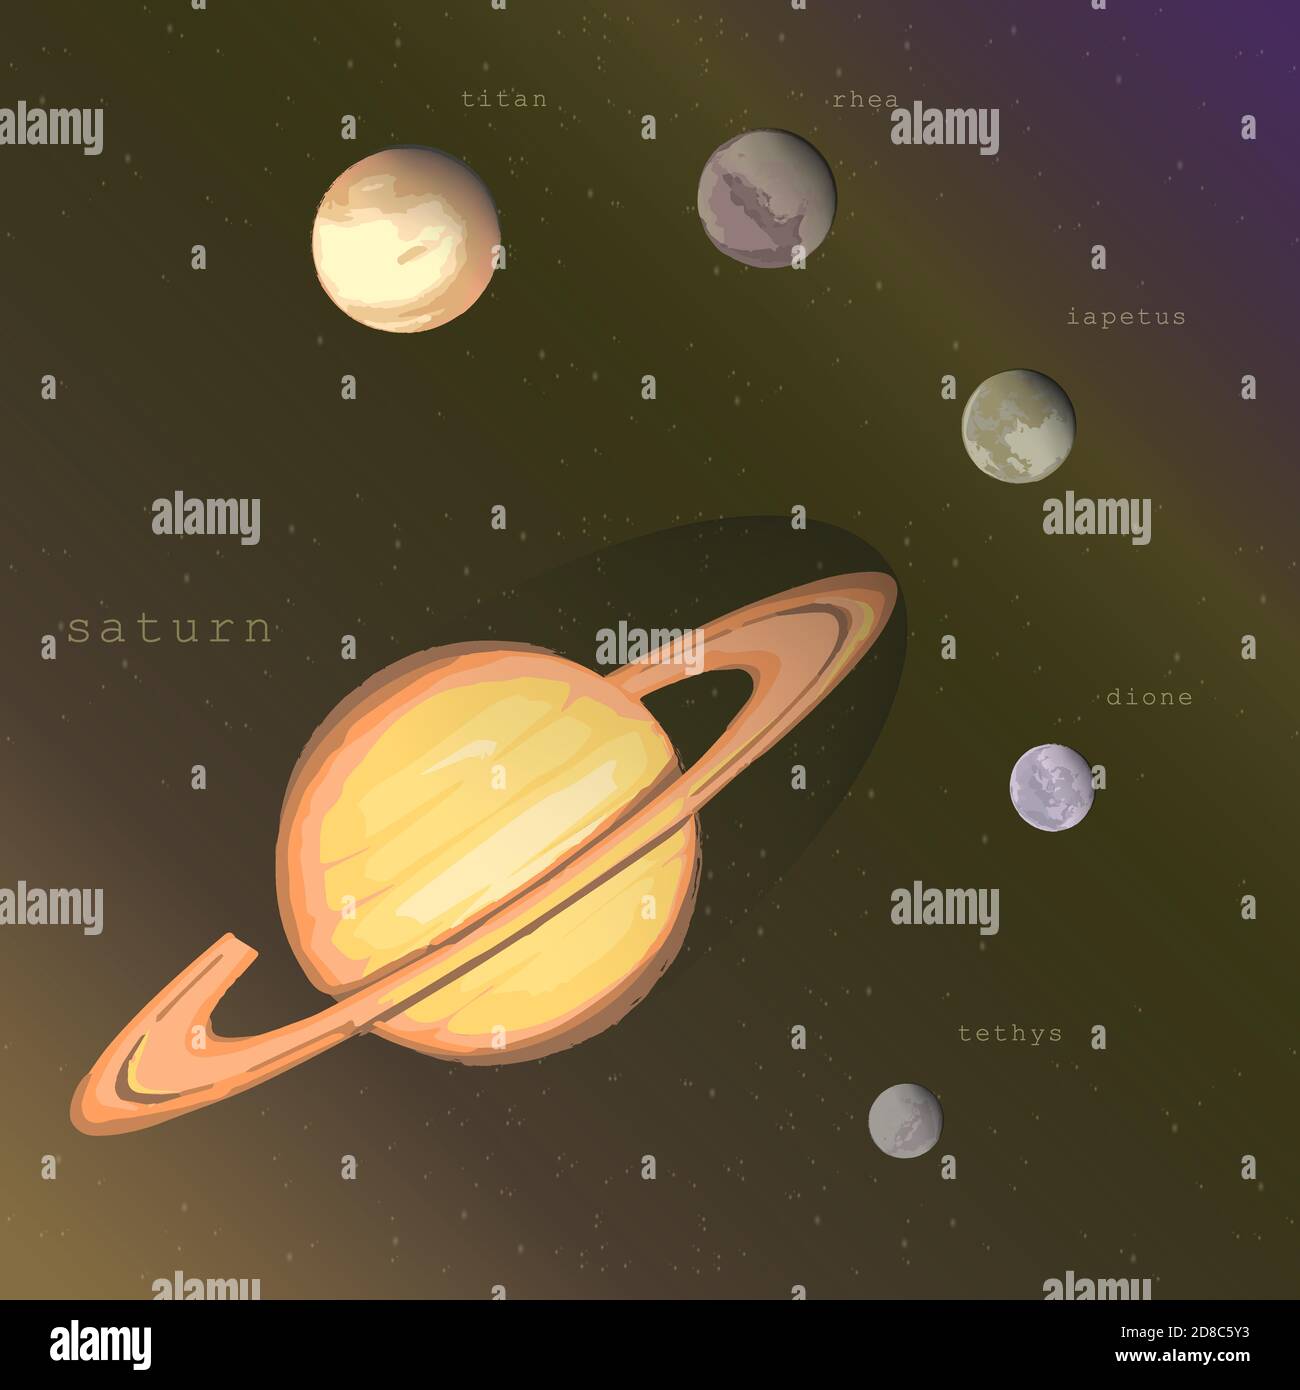 saturn planet with satellites titan rhea iapetus dione tethys on the dark starry cosmic sky. vector infographic educational illustration about space exploration astronomy Stock Vector